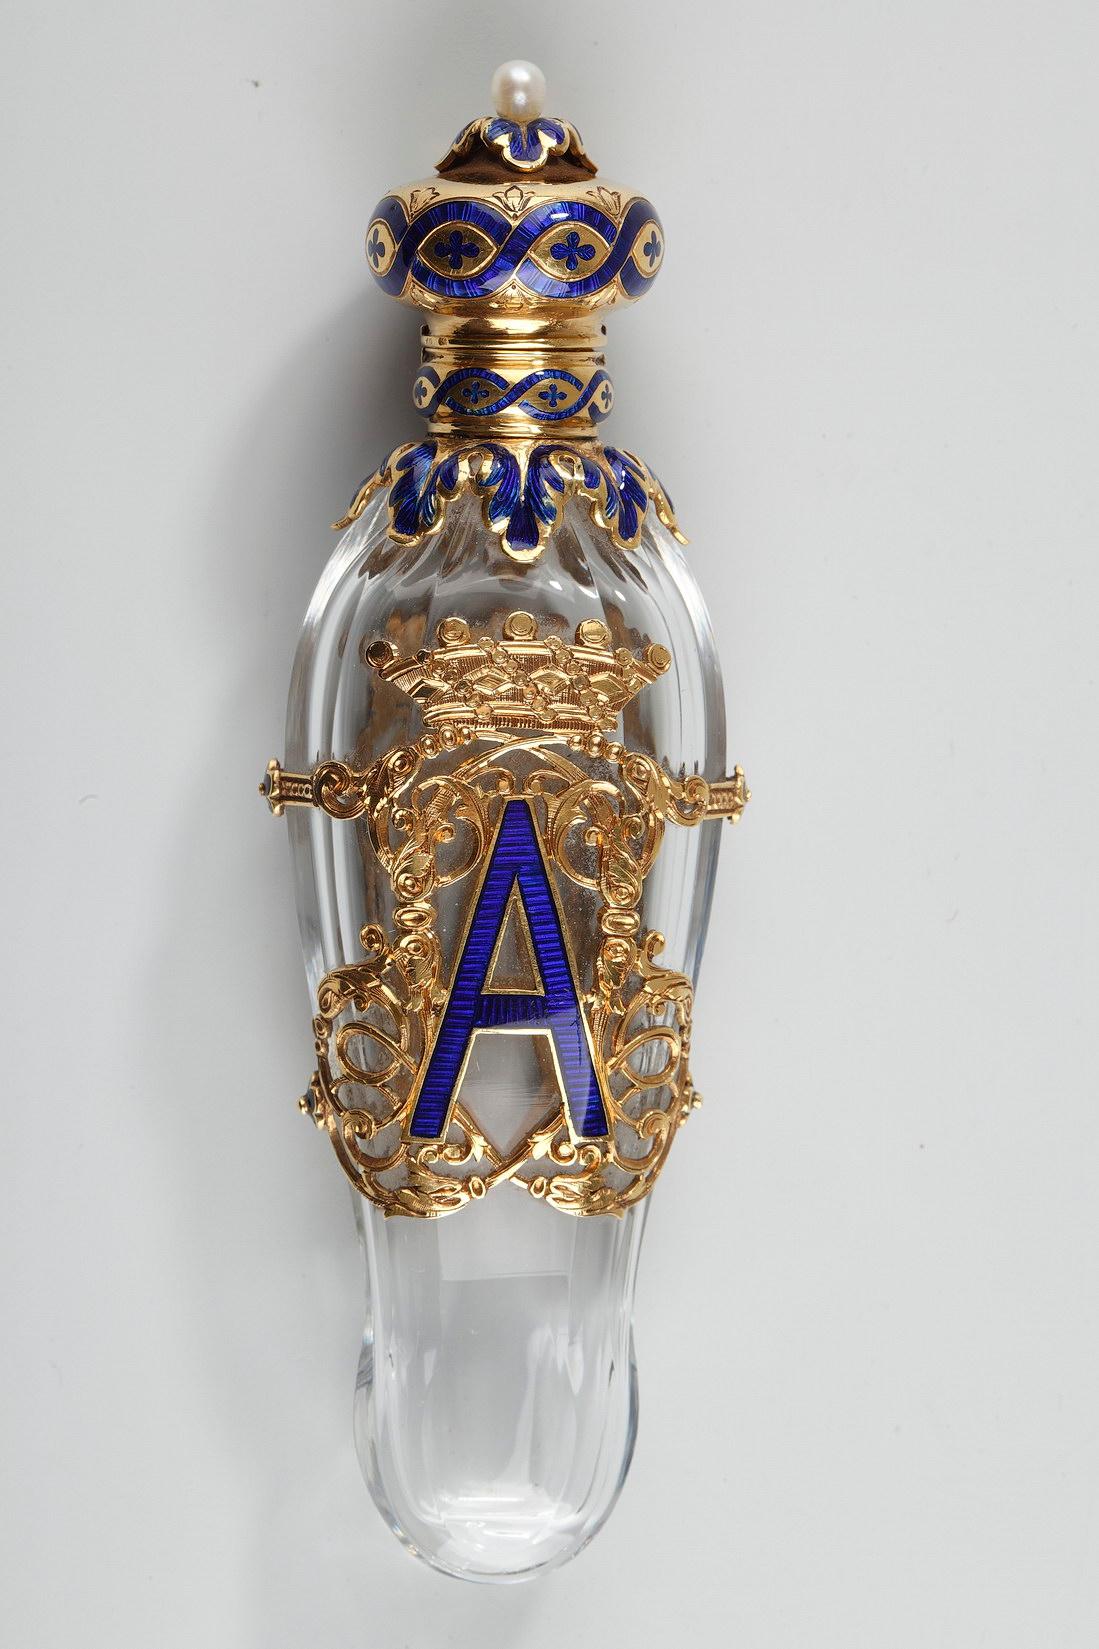 Exceptional conical flask made of faceted crystal. The flask is set in an openwork mount made of gold and royal blue enamel and intricately sculpted with scrollwork motifs. A large monogram letter A is at the center of the mounting. The monogram is